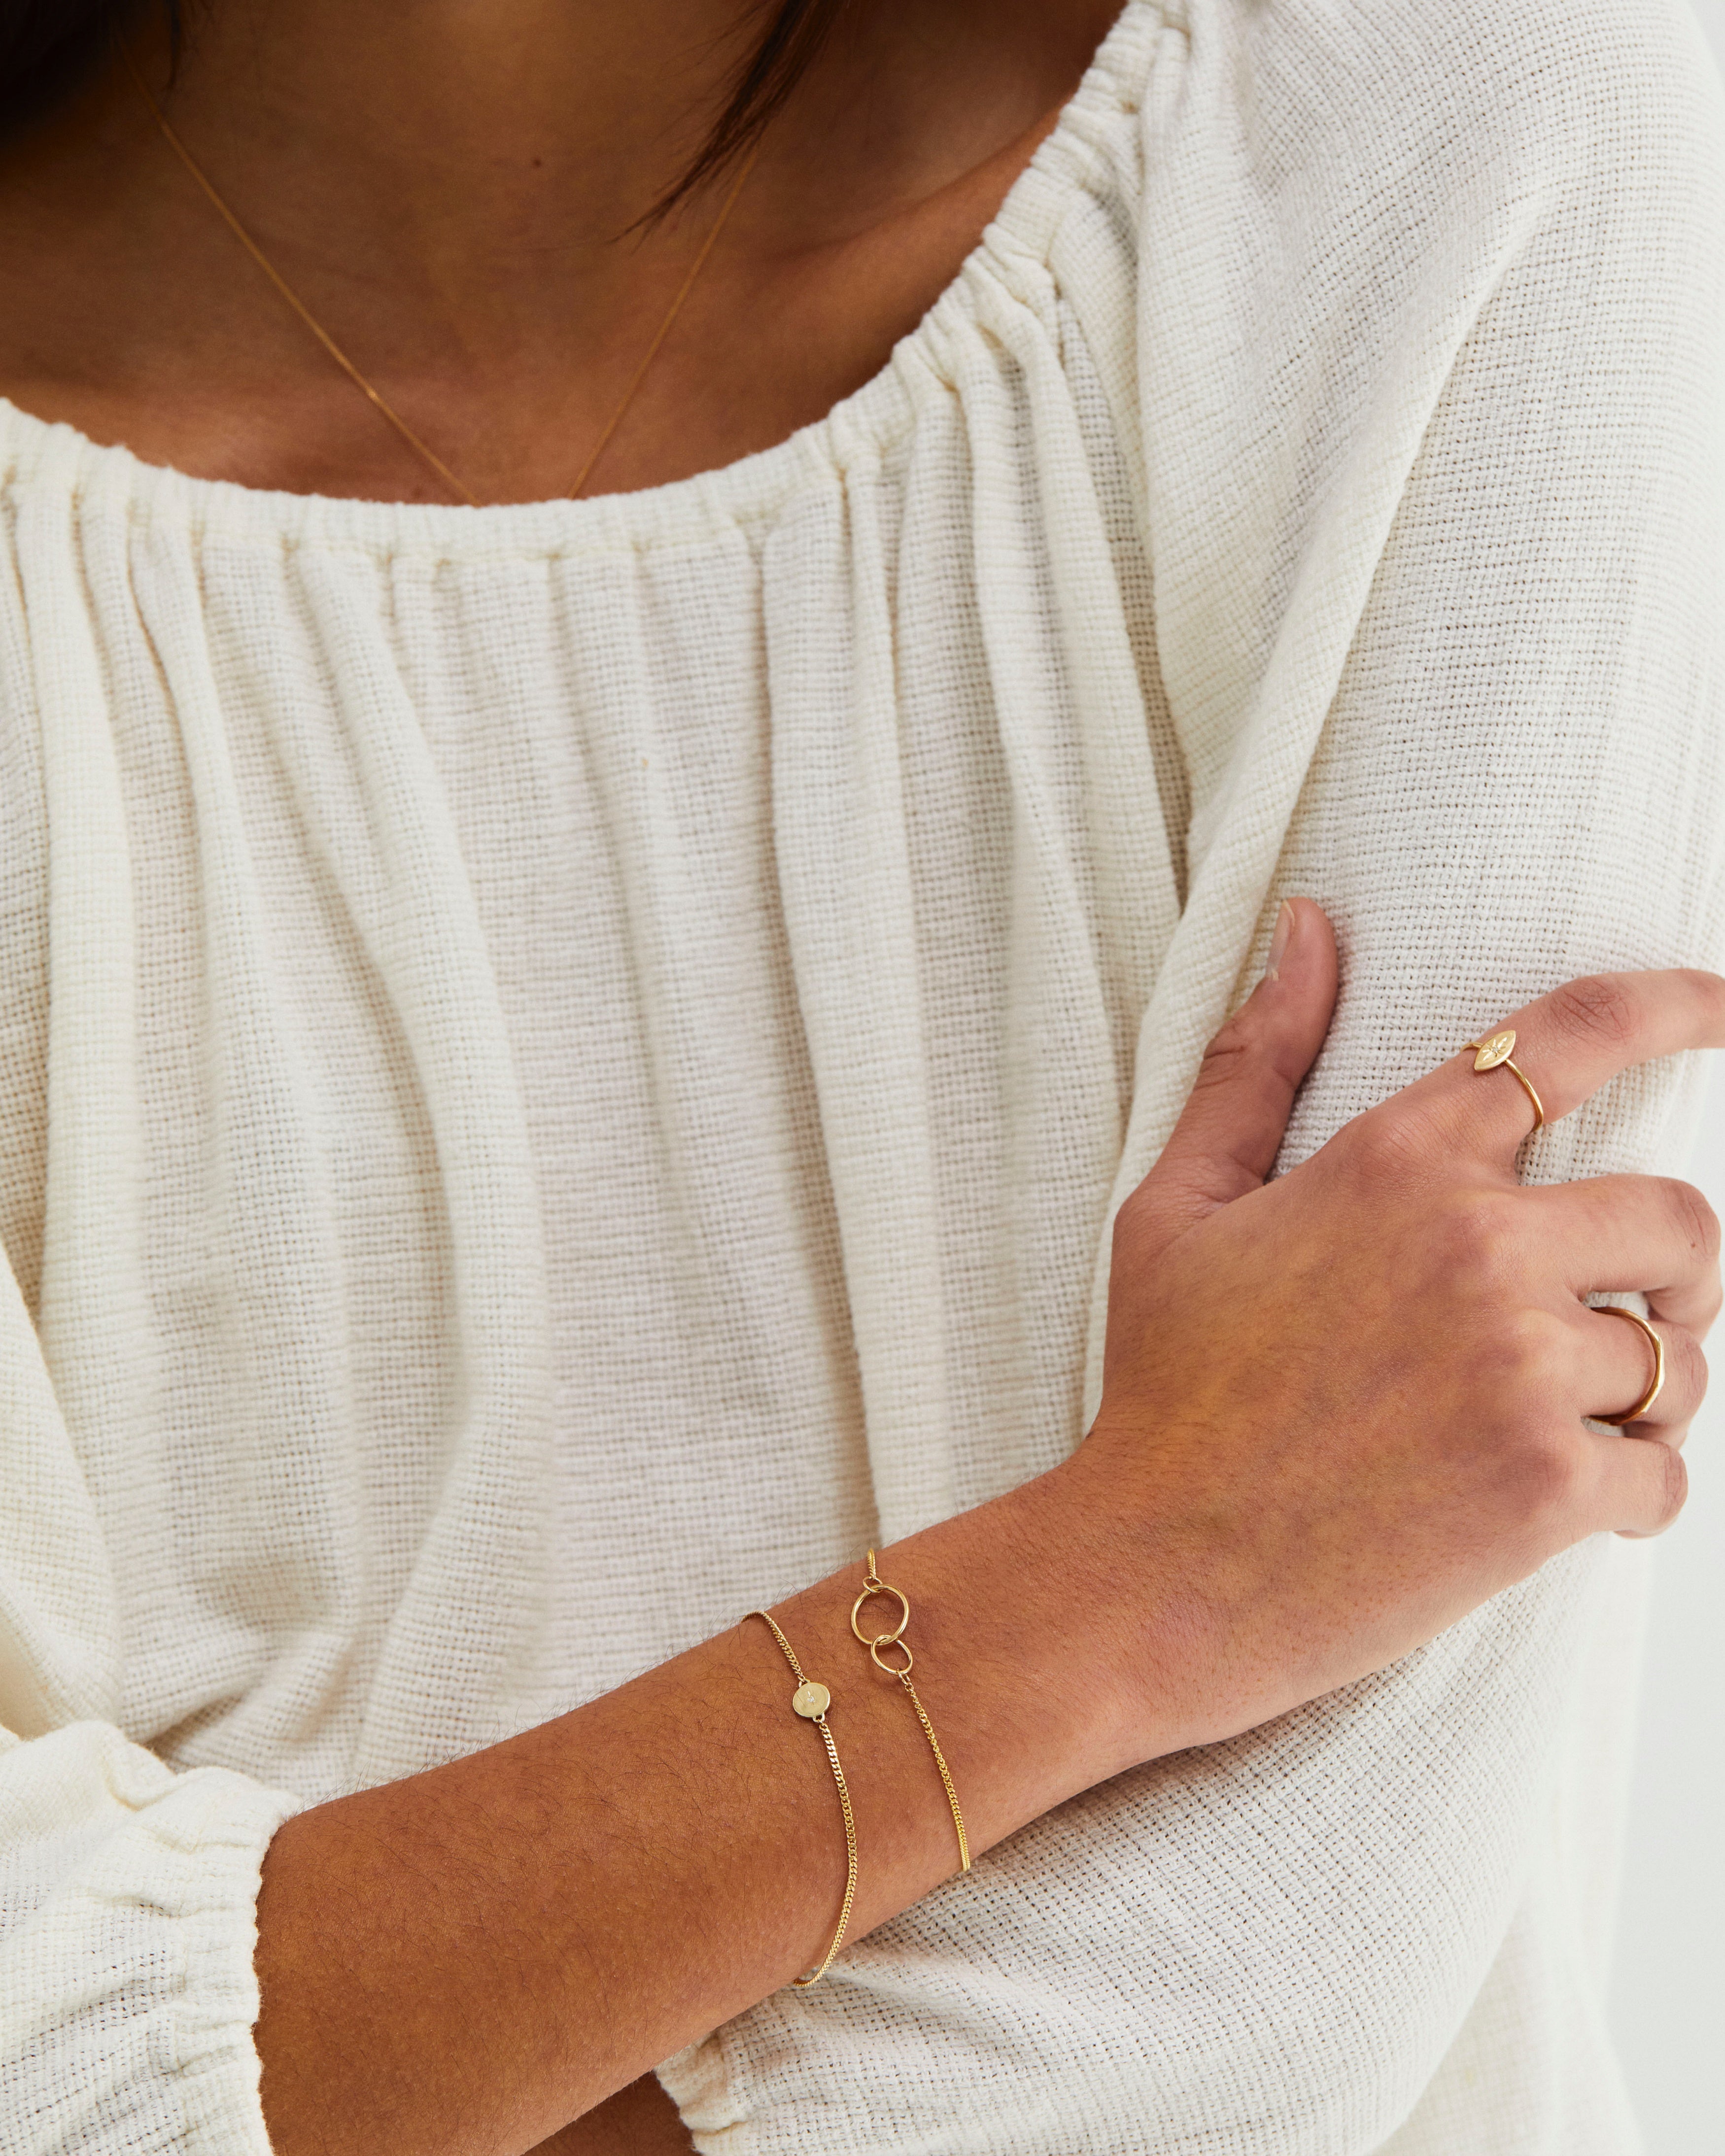 A woman wearing the Loop Through Oval Bracelet paired with the Eily Bracelet | Birthstone, both in yellow gold.